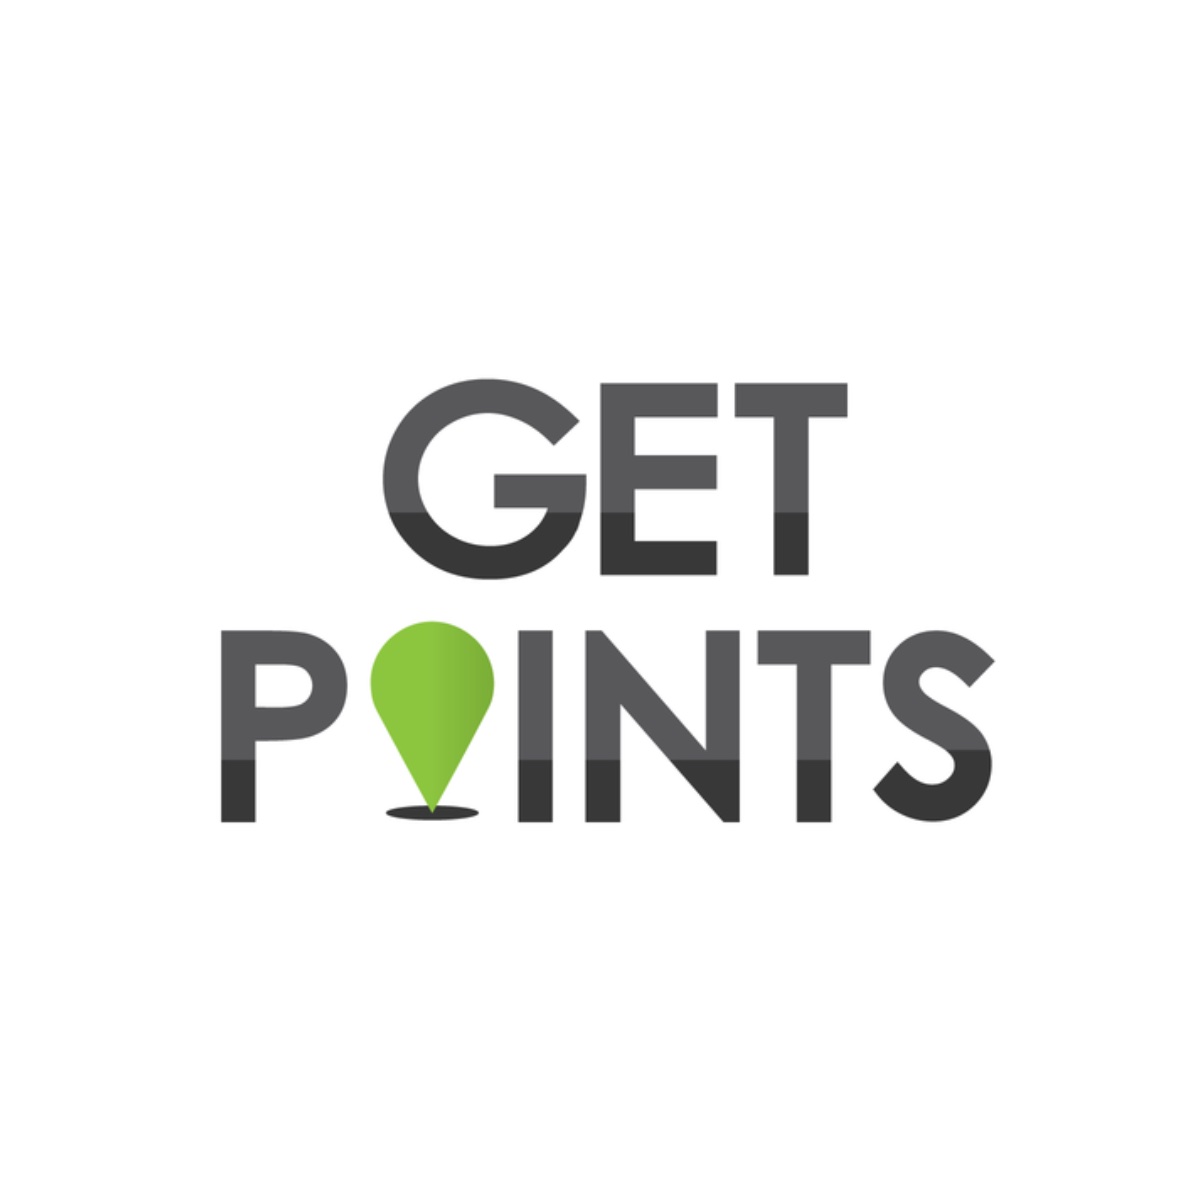 Buy points and boost your post on Hexa Social forum.